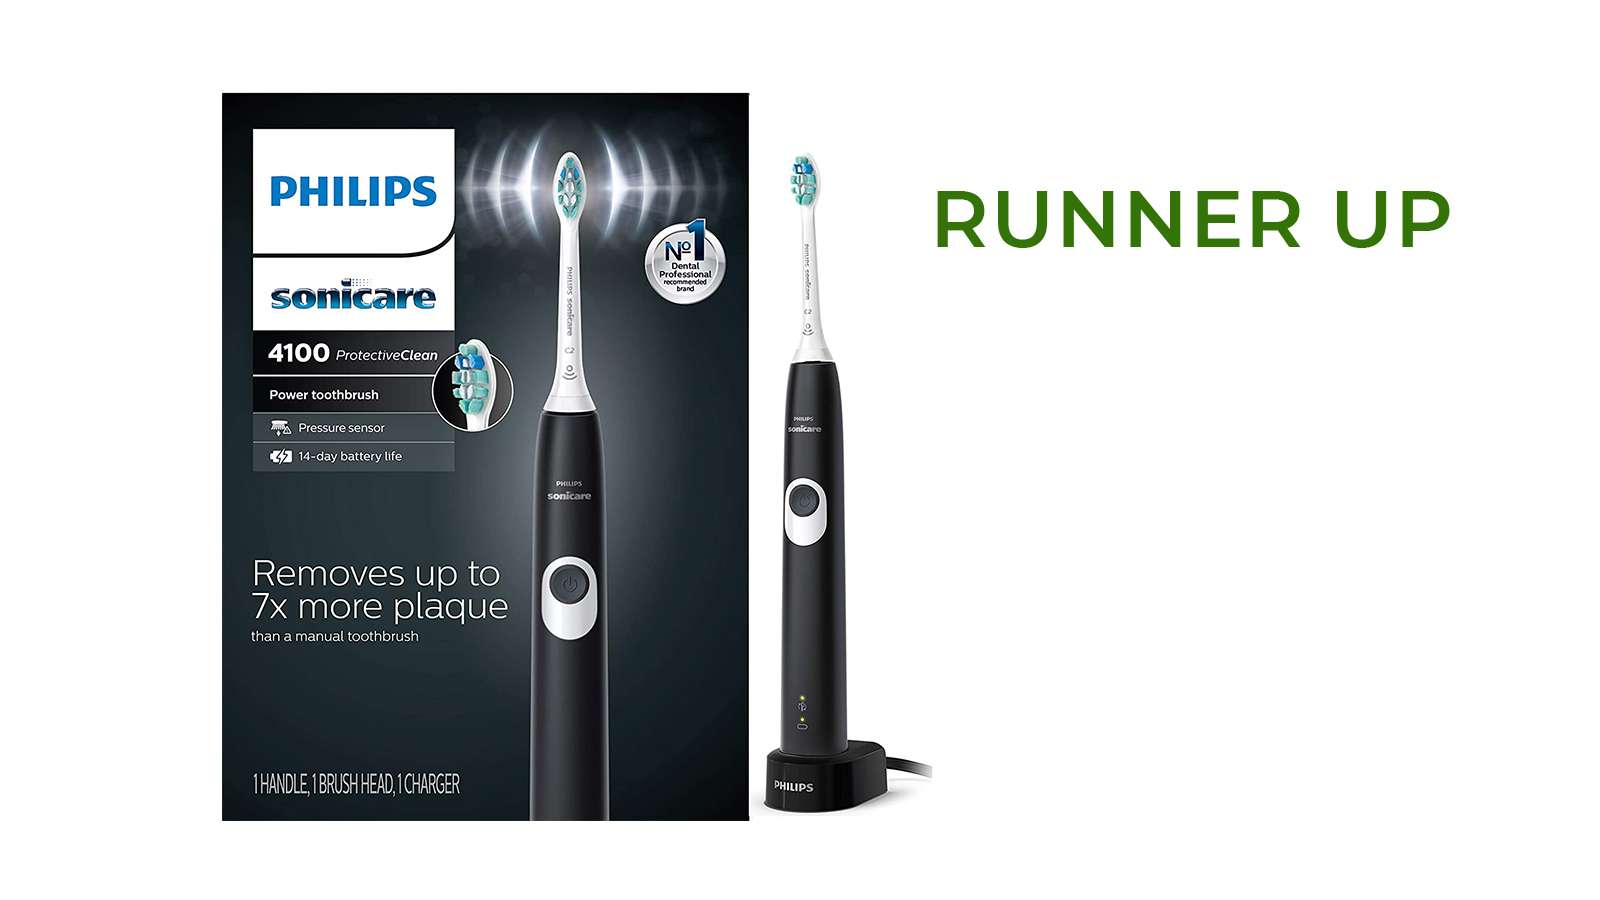 Philips Sonicare ProtectiveClean 4100 (Black, HX6810/50) toothbrush and its packaging